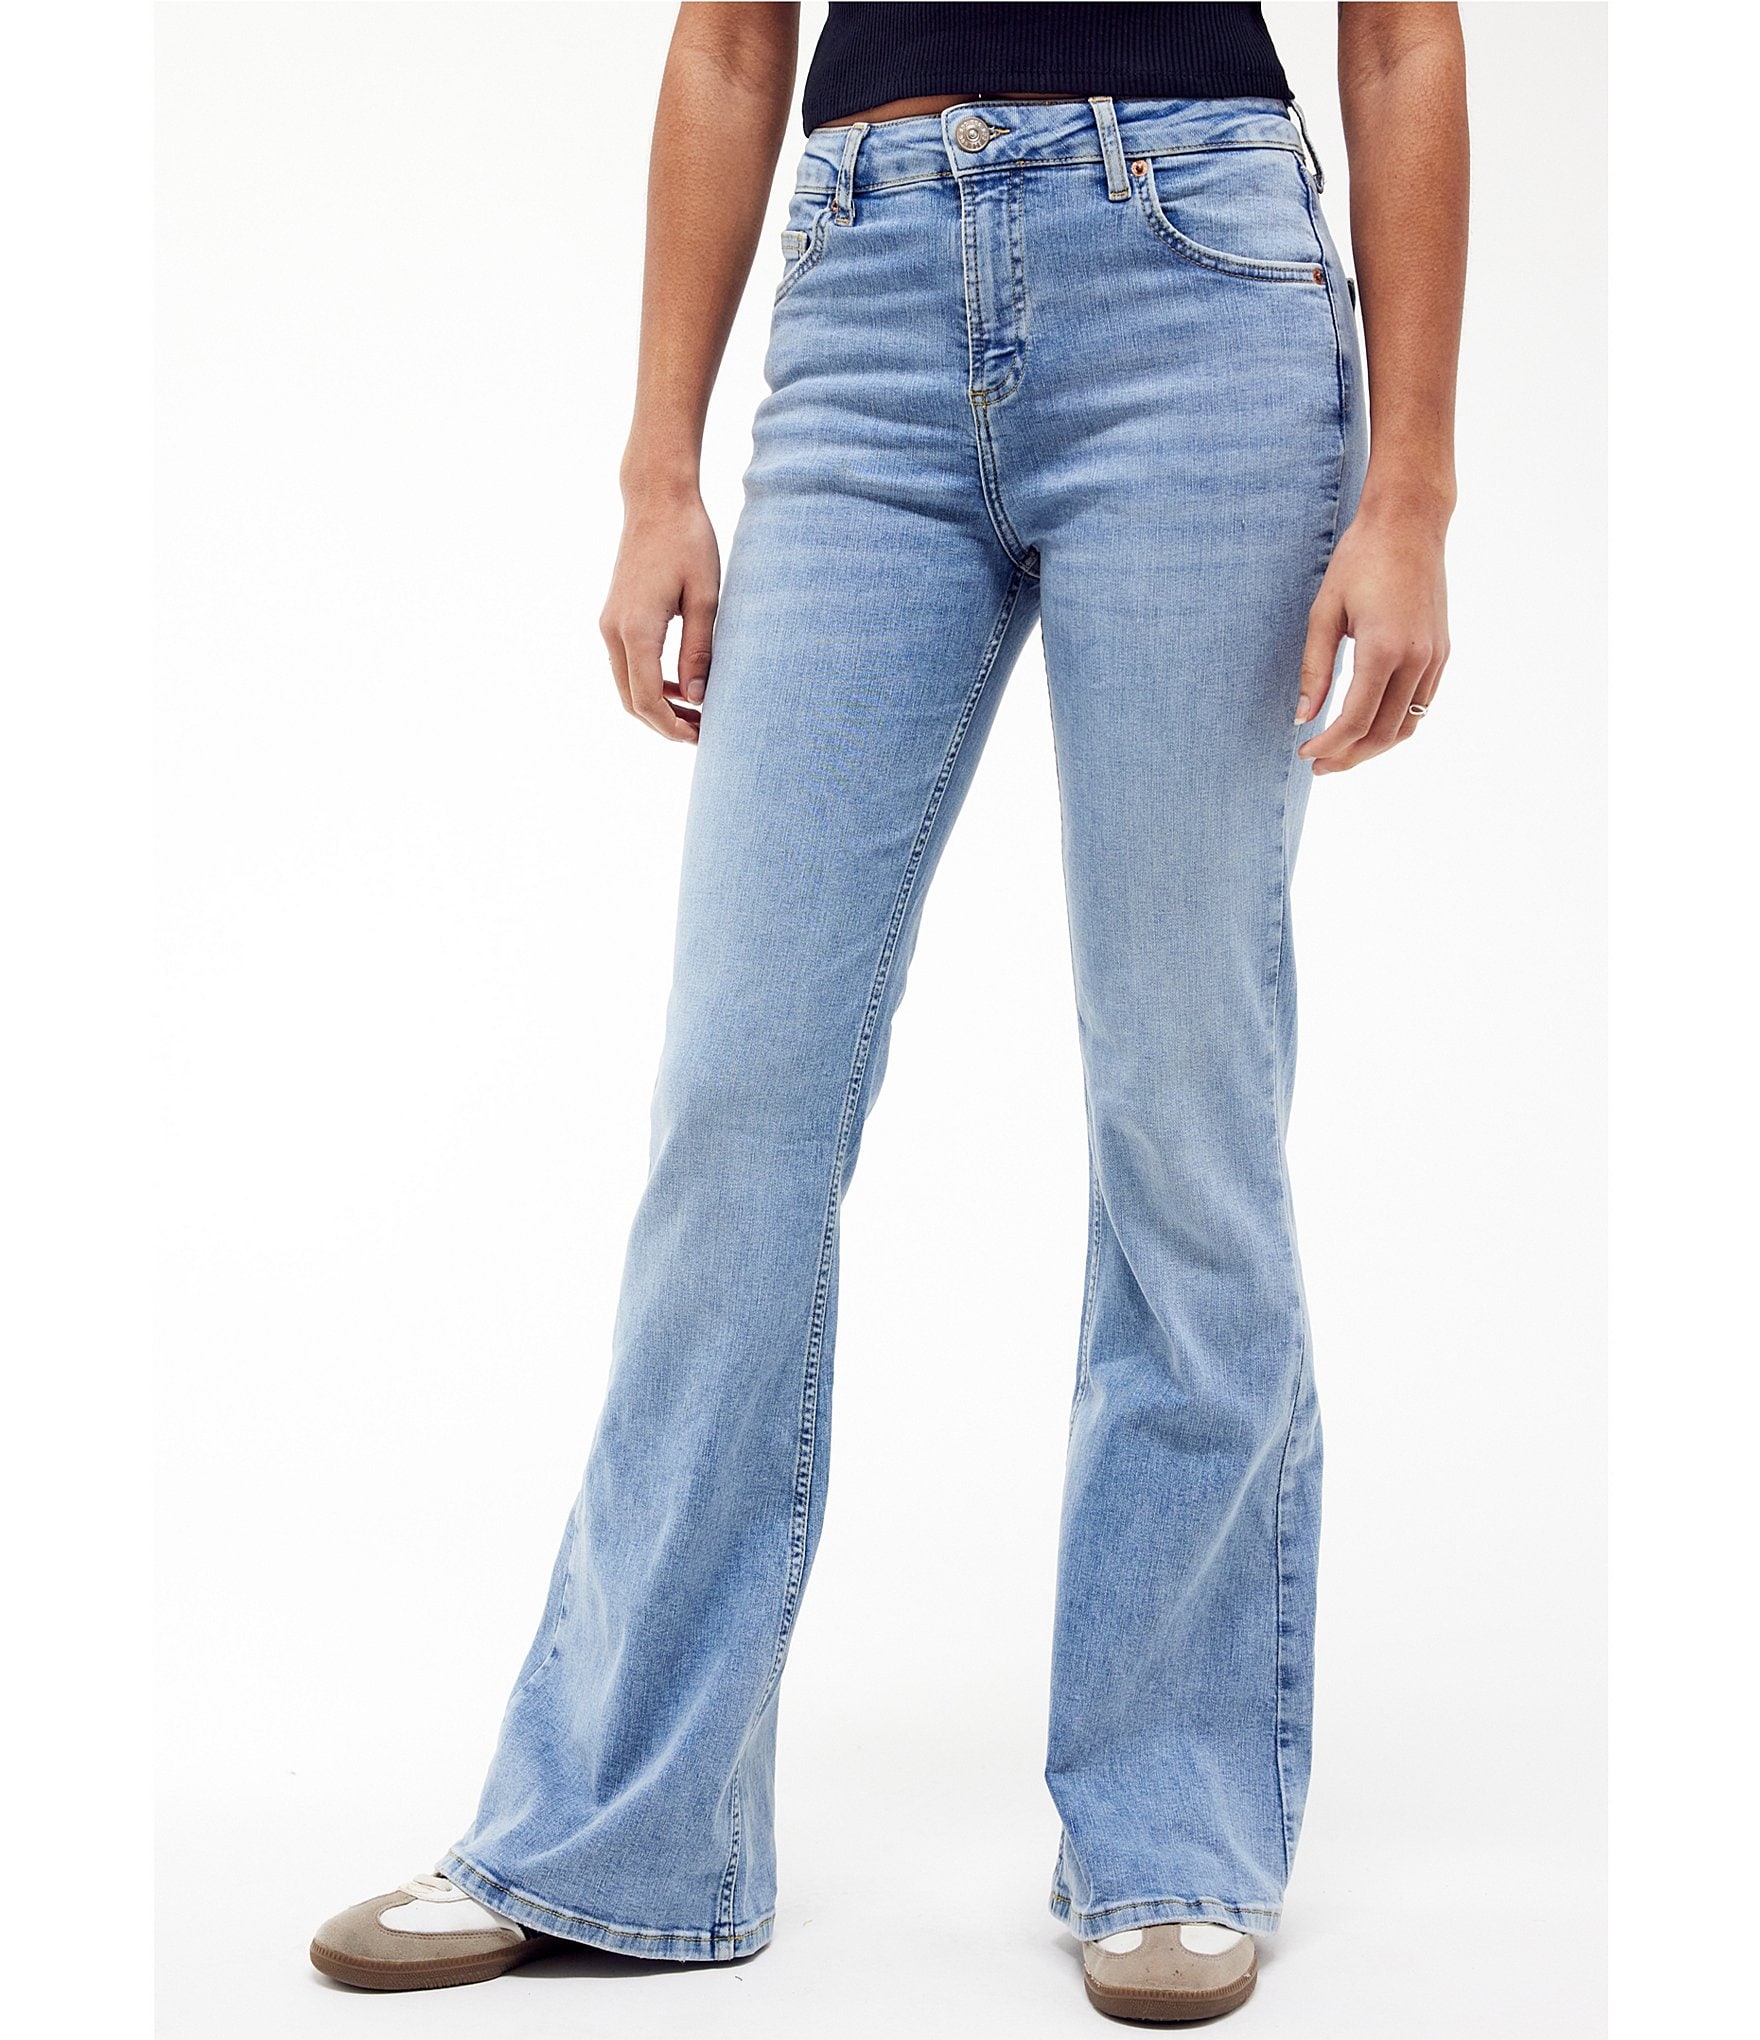 https://dimg.dillards.com/is/image/DillardsZoom/zoom/bdg-urban-outfitters-vintage-mid-rise-flare-jeans/00000000_zi_705b674b-a876-4a73-839f-51eb8e5c565c.jpg